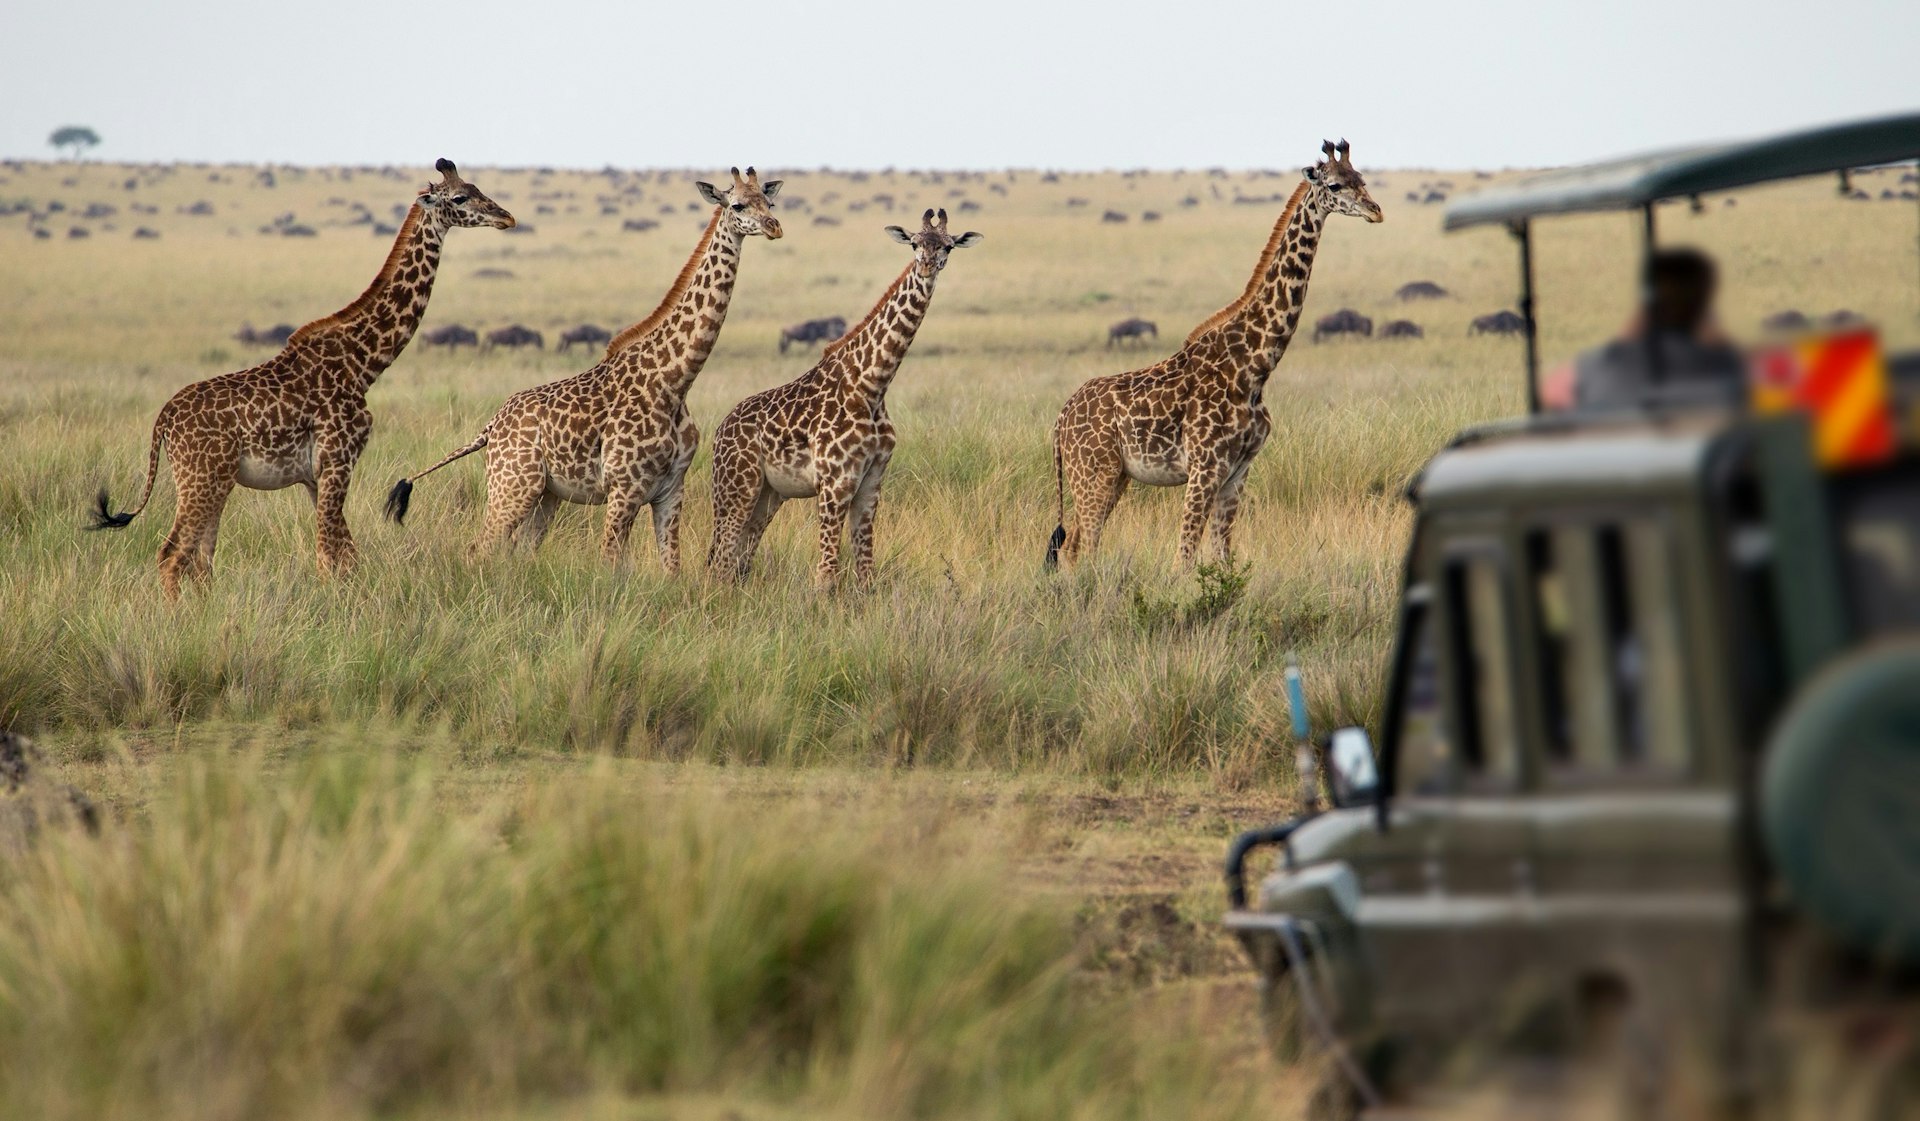 A blurred, open-topped 4WD sits in the right side of this image, while four large giraffe look on. In the background is a savannah flooded with wildebeest.